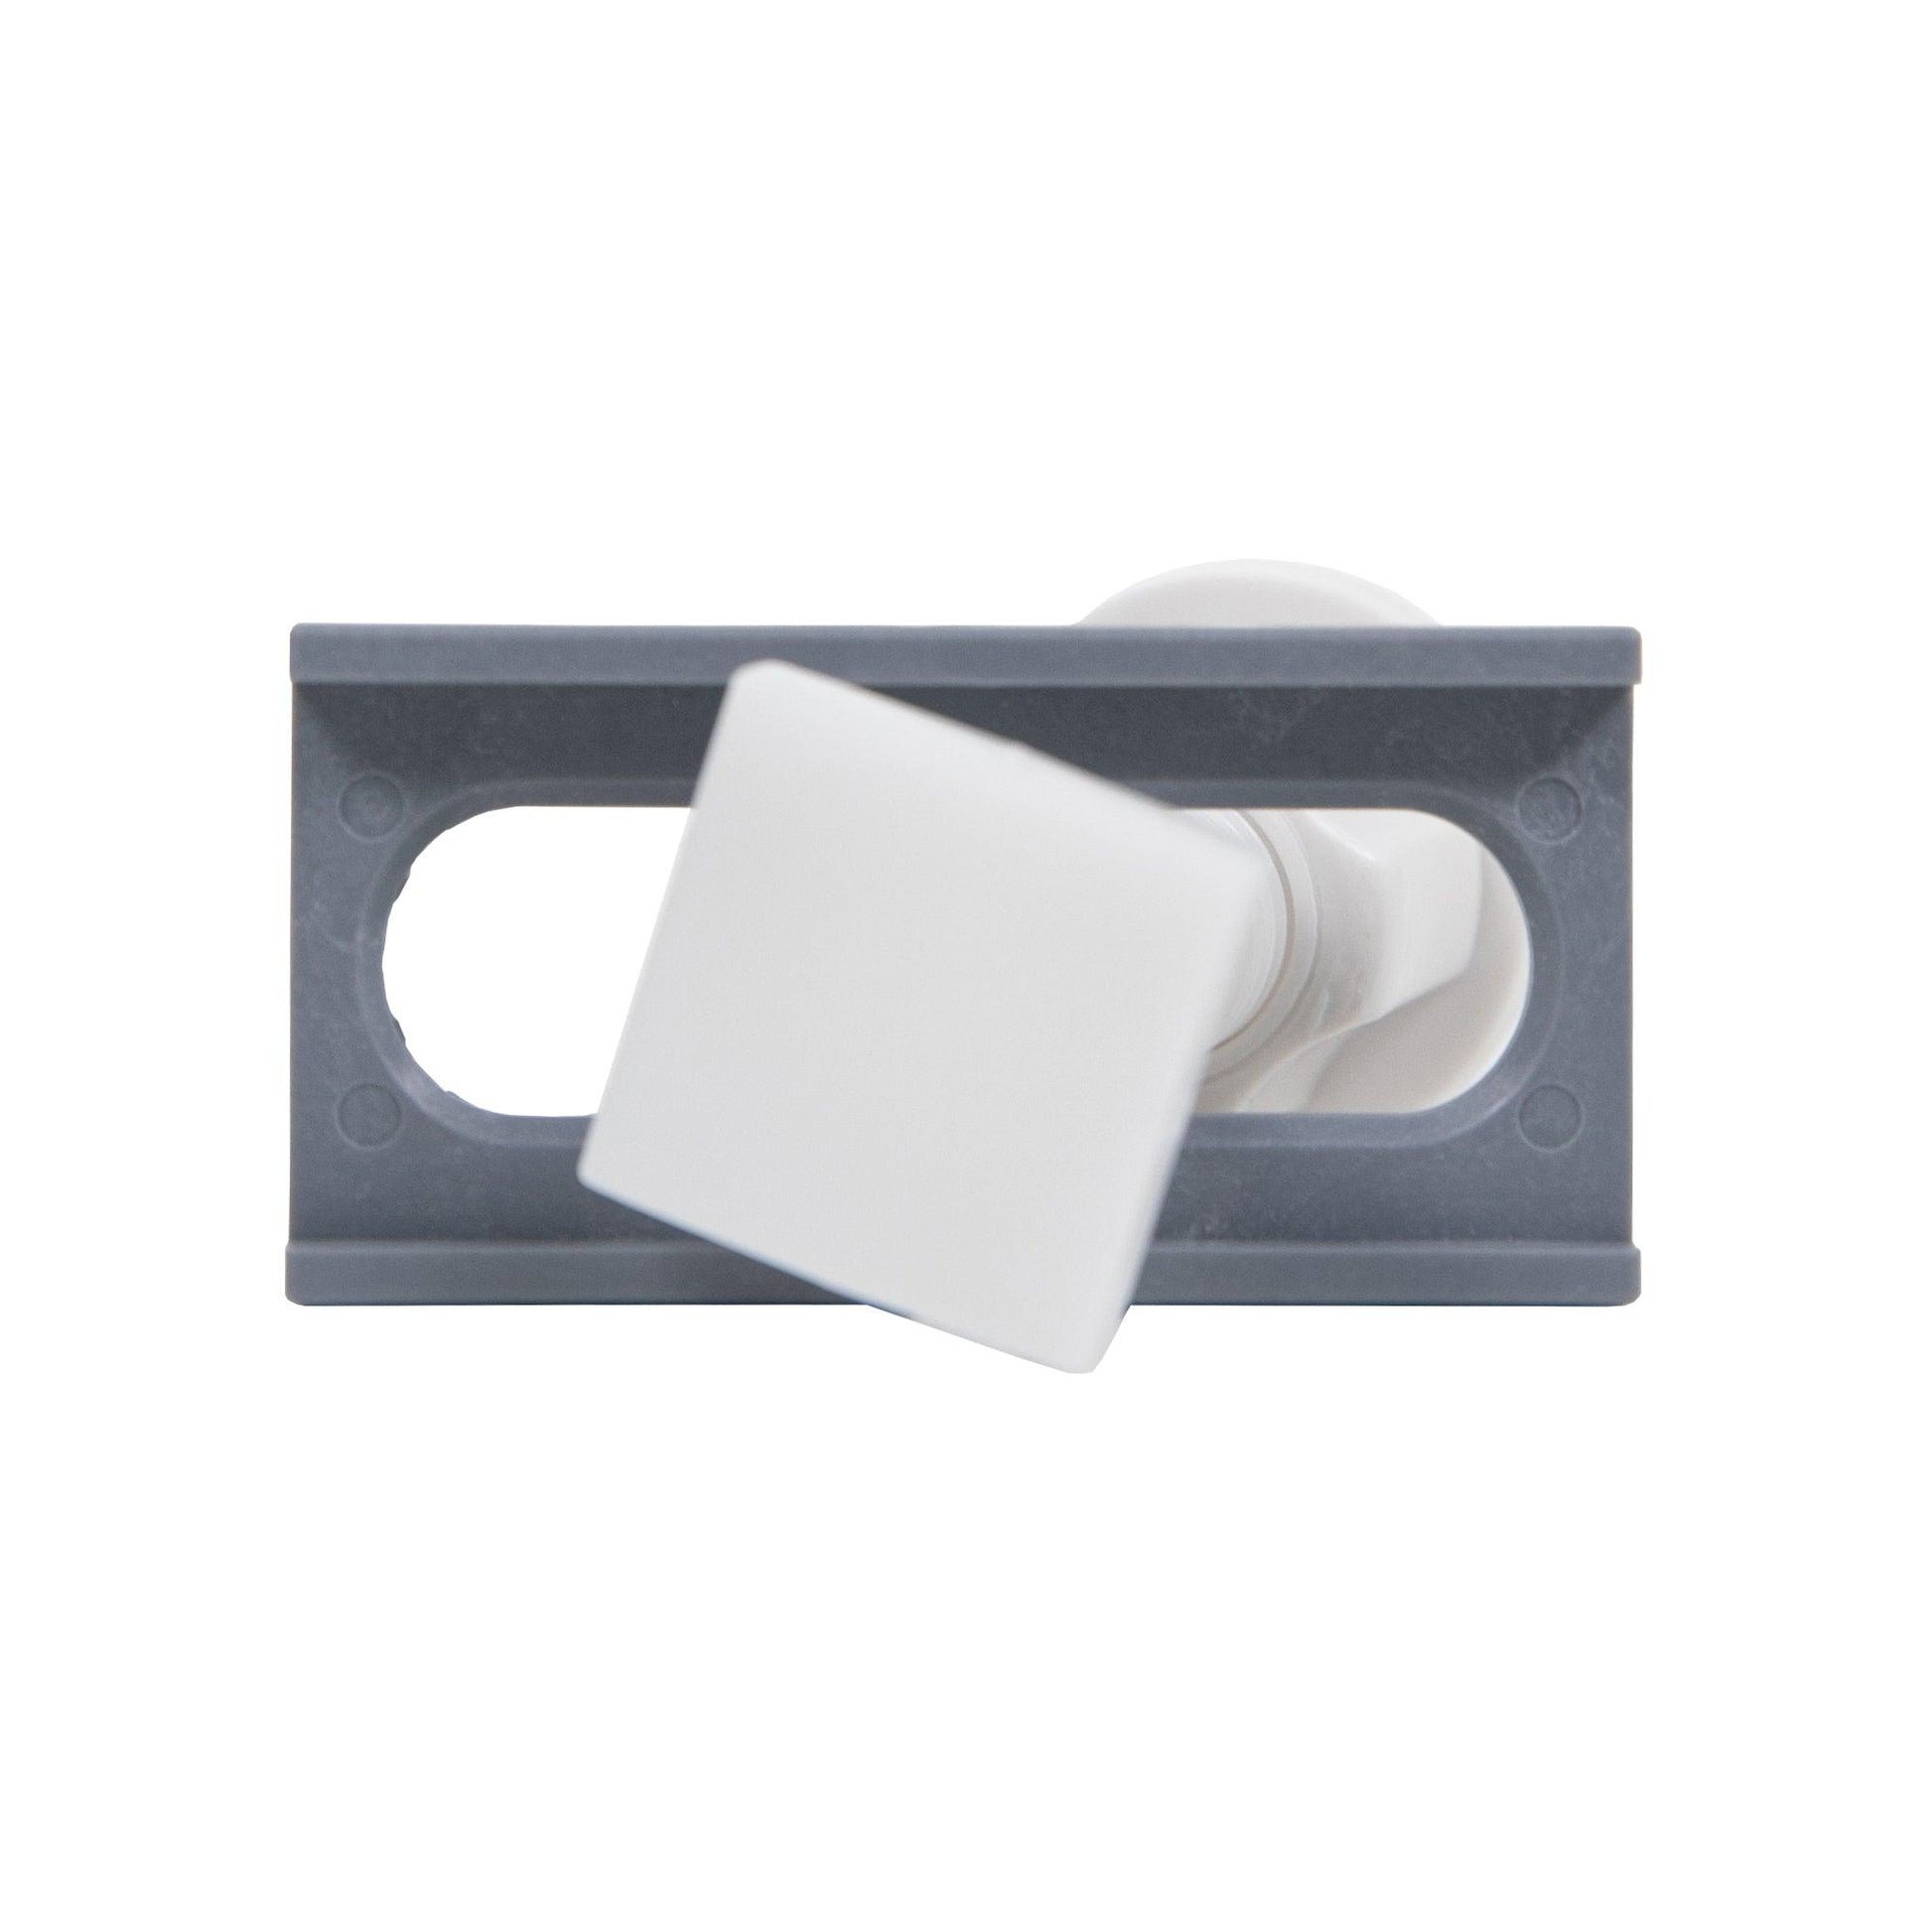 Bidet Mounting Plate Kit - Inus Home USA｜Pleasant Living Experience!